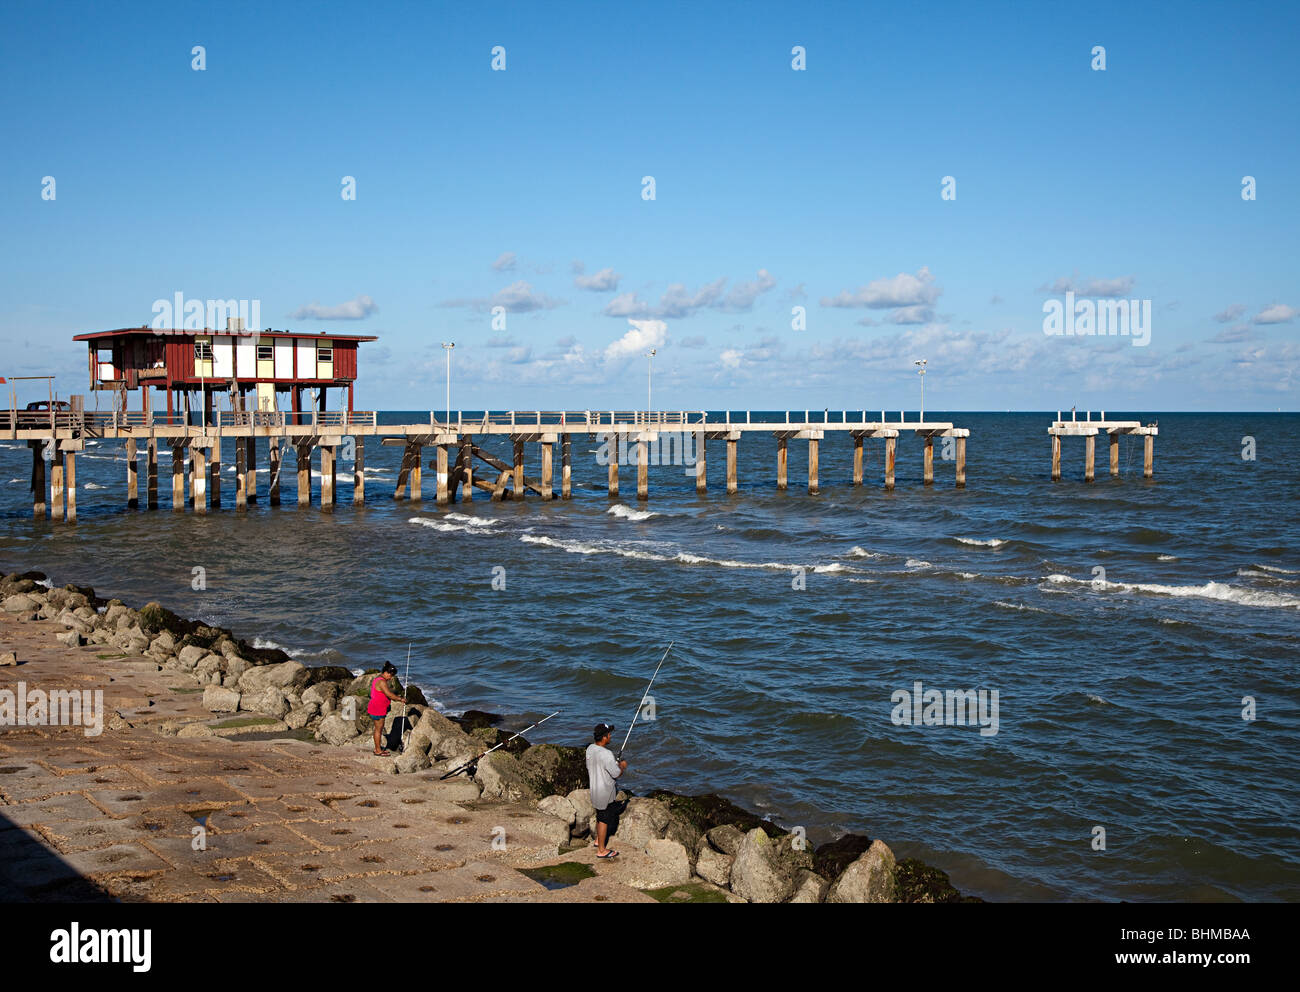 Two people fishing on sea front beside ruined pier Galveston Texas USA Stock Photo